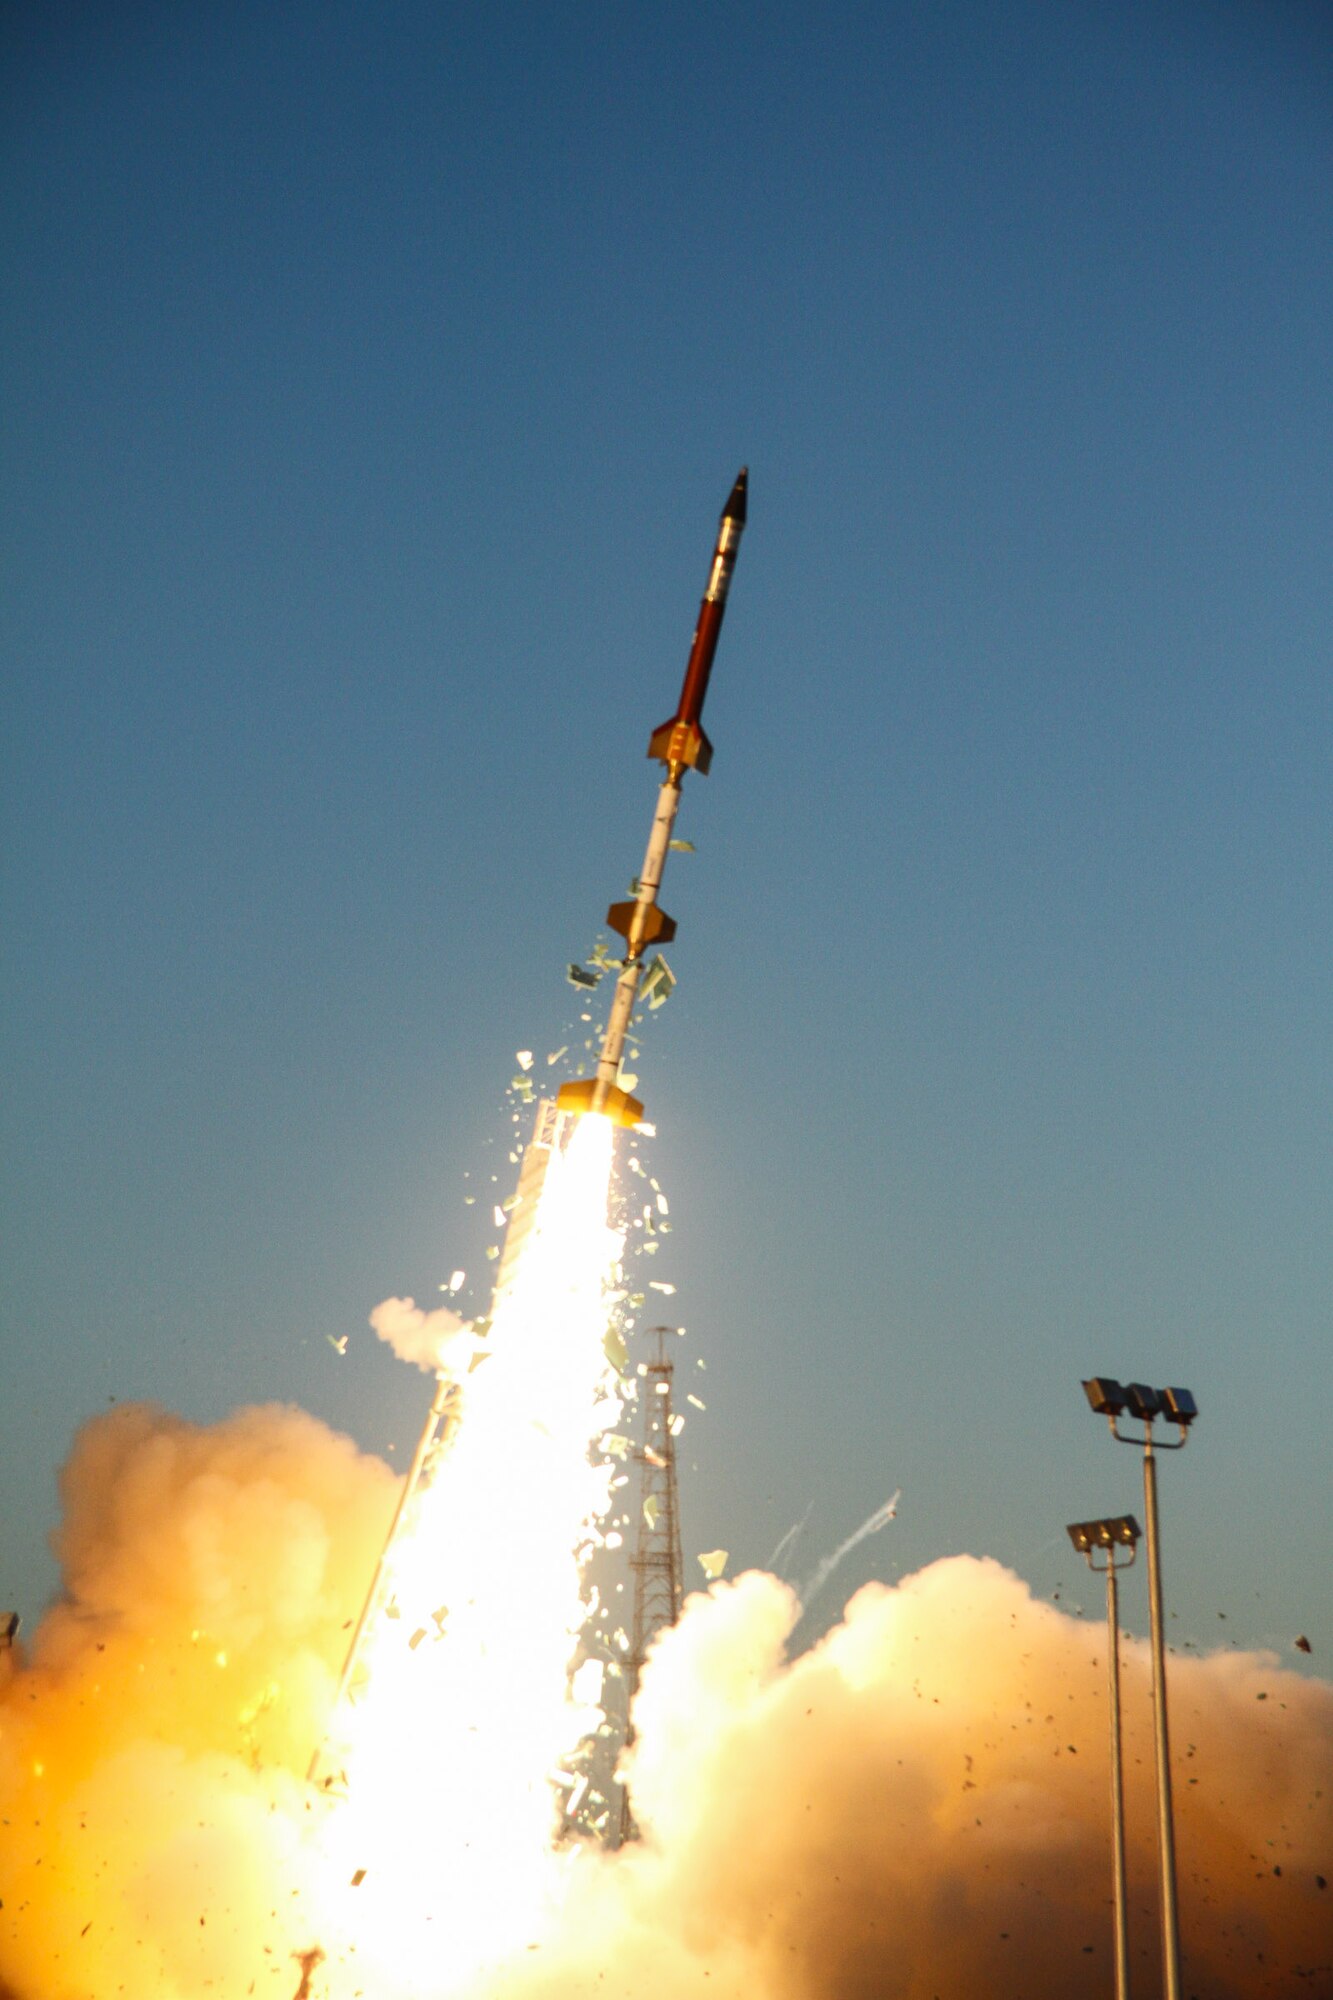 Guardians and Airmen from the Space and Missile Systems Center’s Launch Enterprise team successfully launched an experimental research payload for the Air Force Research Laboratory March 3, 2021, from NASA’s Wallops Flight Facility in Virginia. (Courtesy photo)